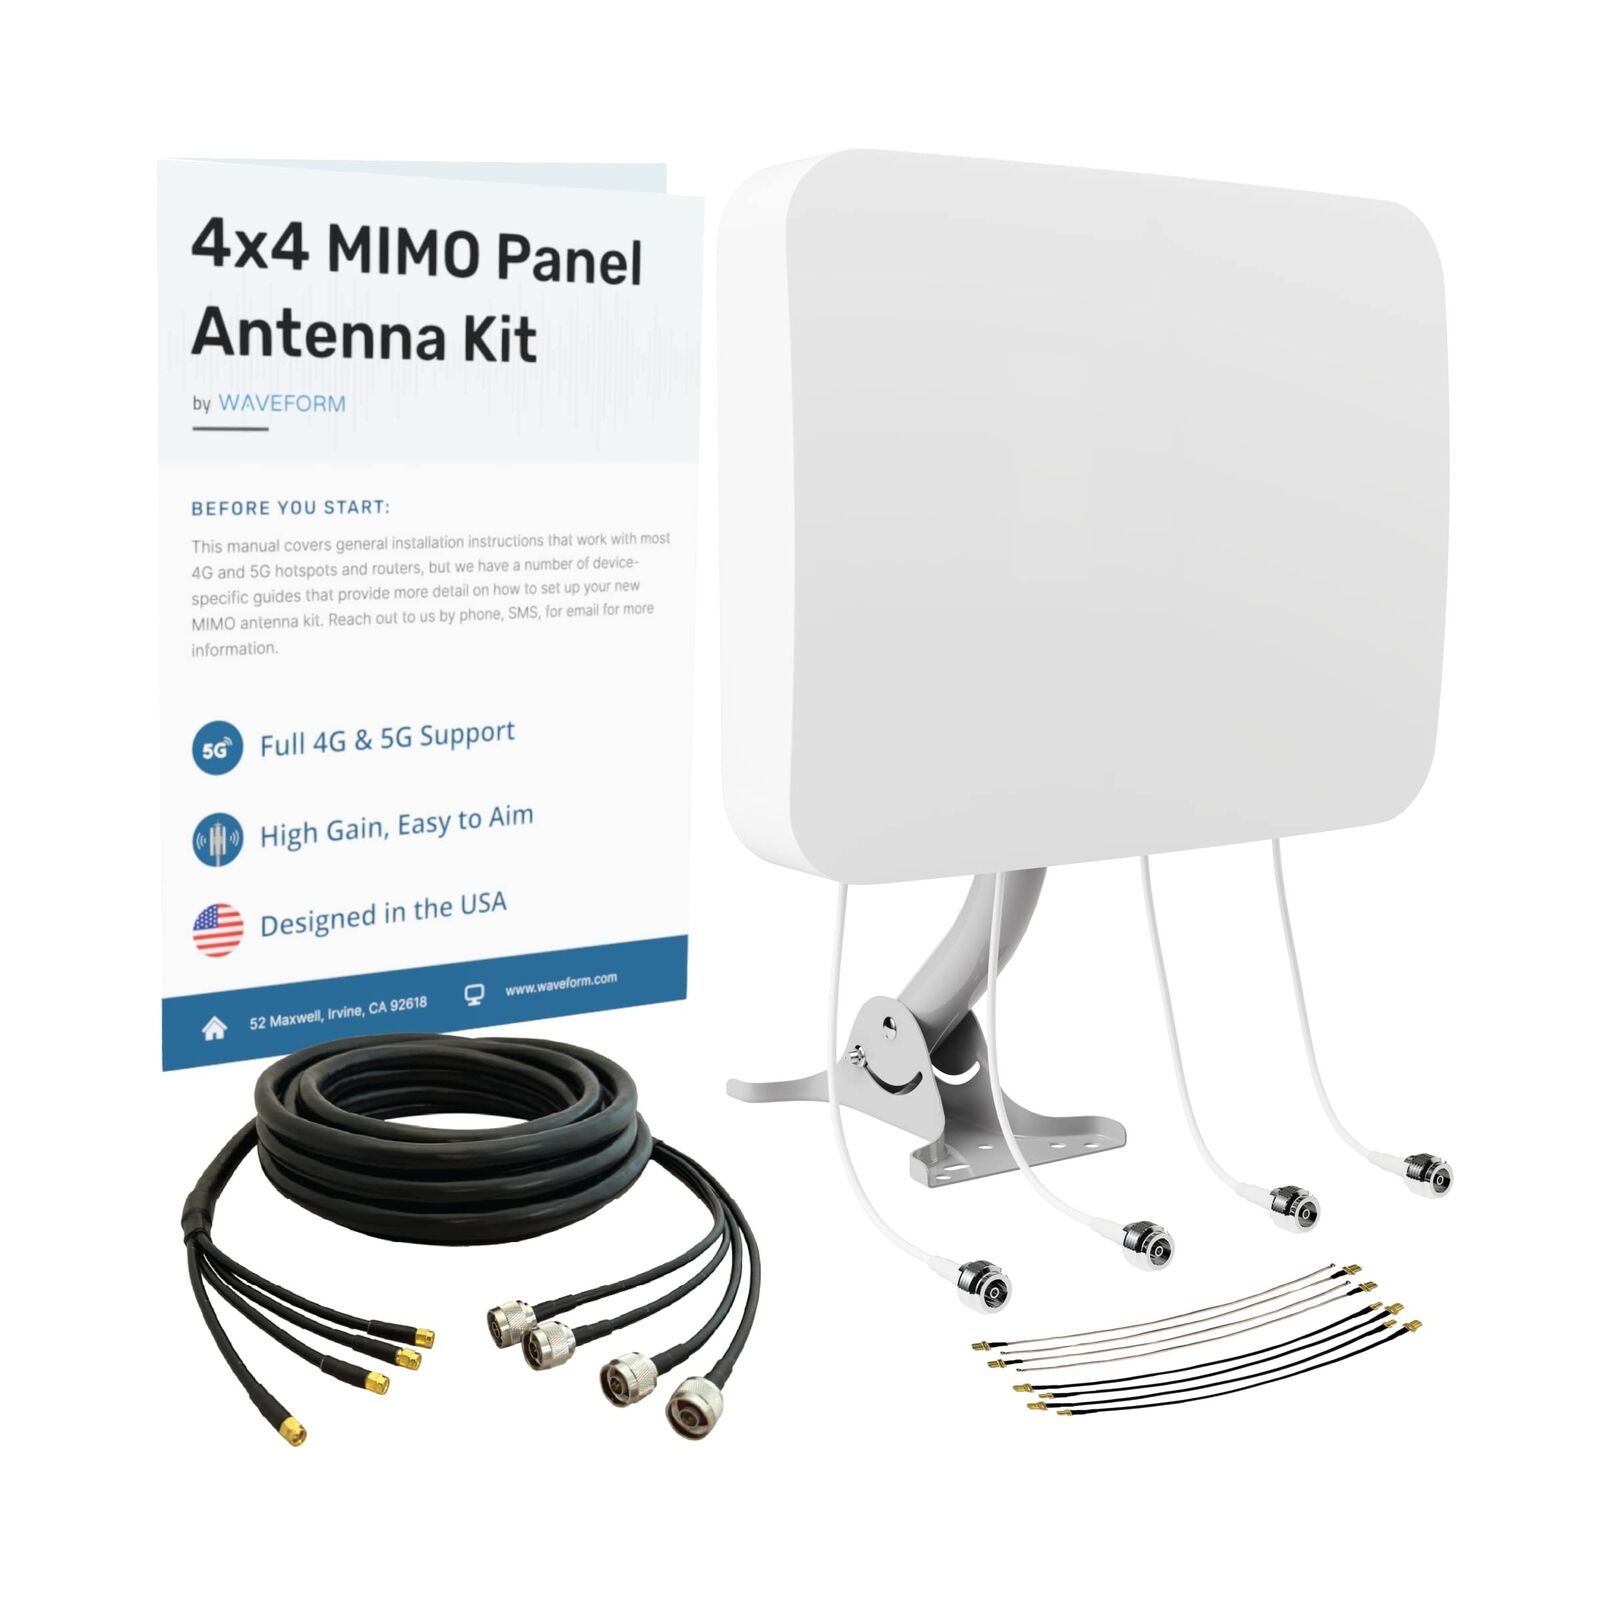 Waveform MIMO 4x4 Panel Antenna Kit for 4G & 5G Cellular Hotspots, Routers, &...